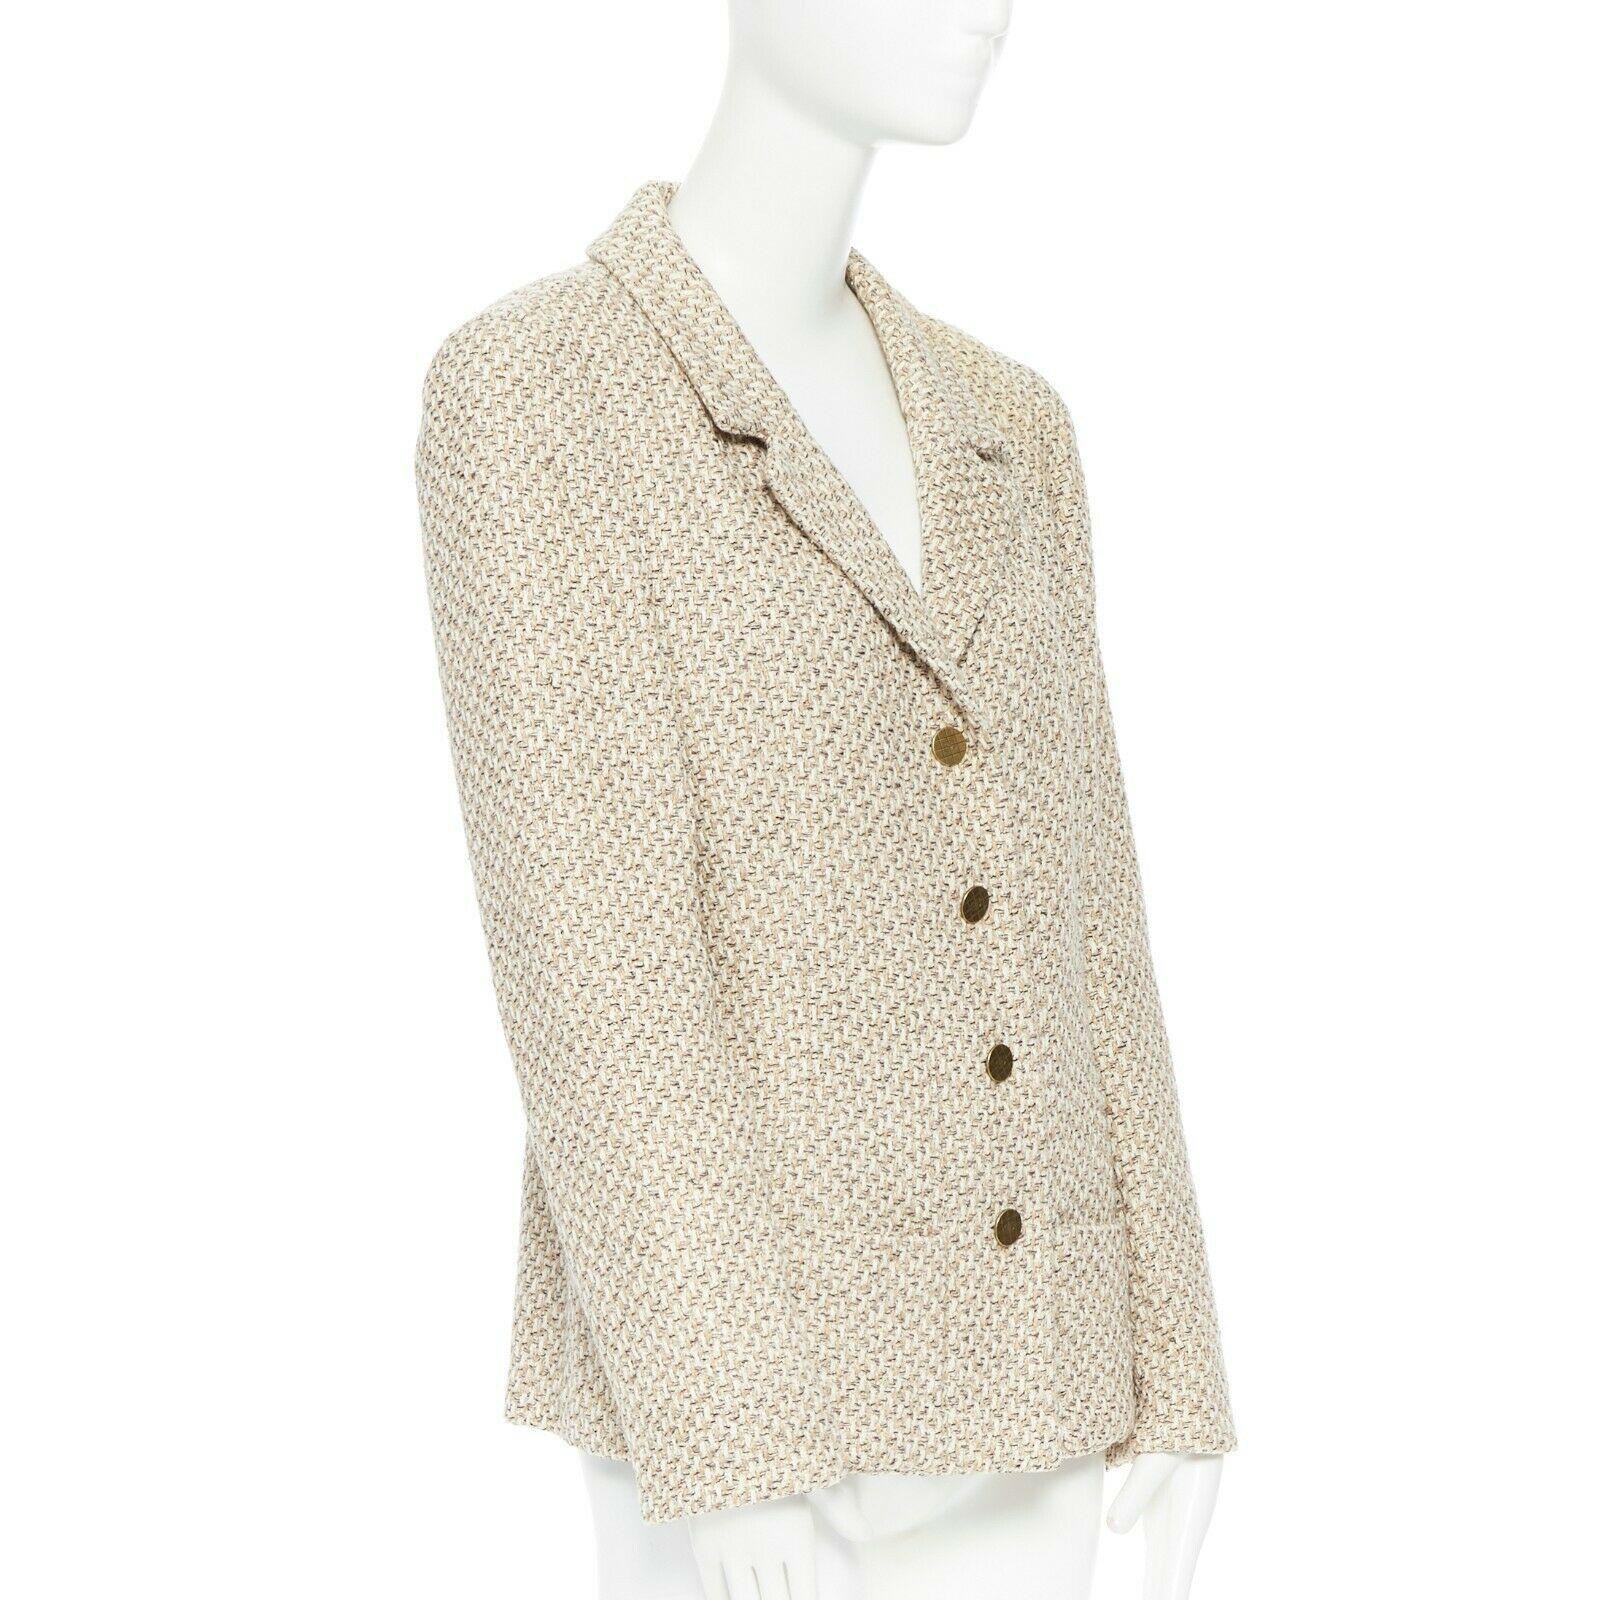 CHANEL 01P beige knit tweed shoulder pad classic straight blazer jacket FR44
Brand: CHANEL
Designer: Karl Lagerfeld
Collection: 01P
Model Name / Style: Tweed jacket
Material: Tweed and silk
Color: Beige
Pattern: Solid
Closure: Button
Lining